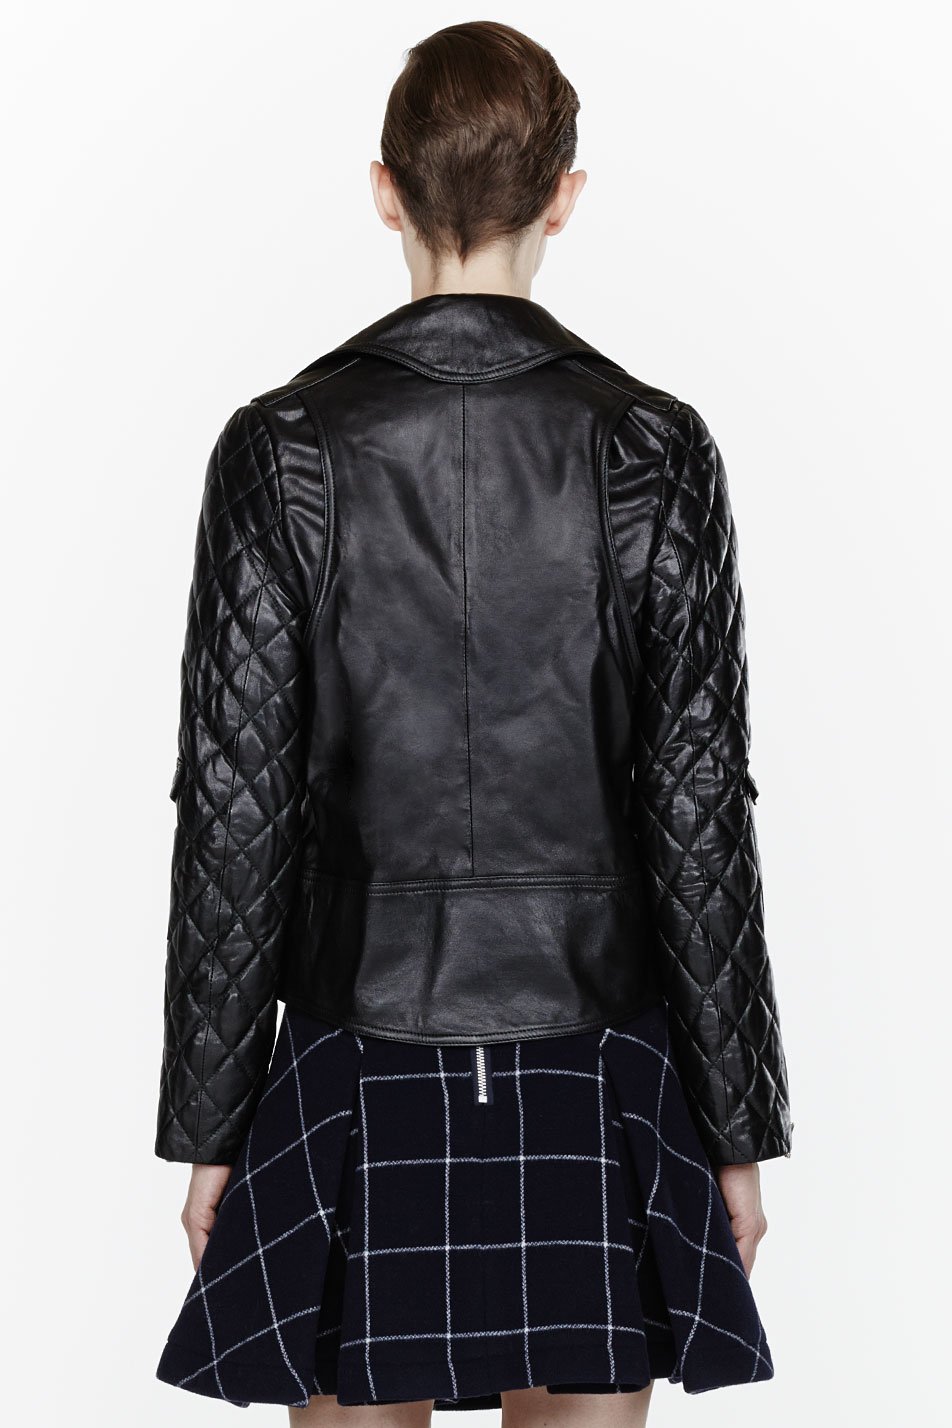 JW Anderson Black Leather Quilted Biker Jacket - Lyst